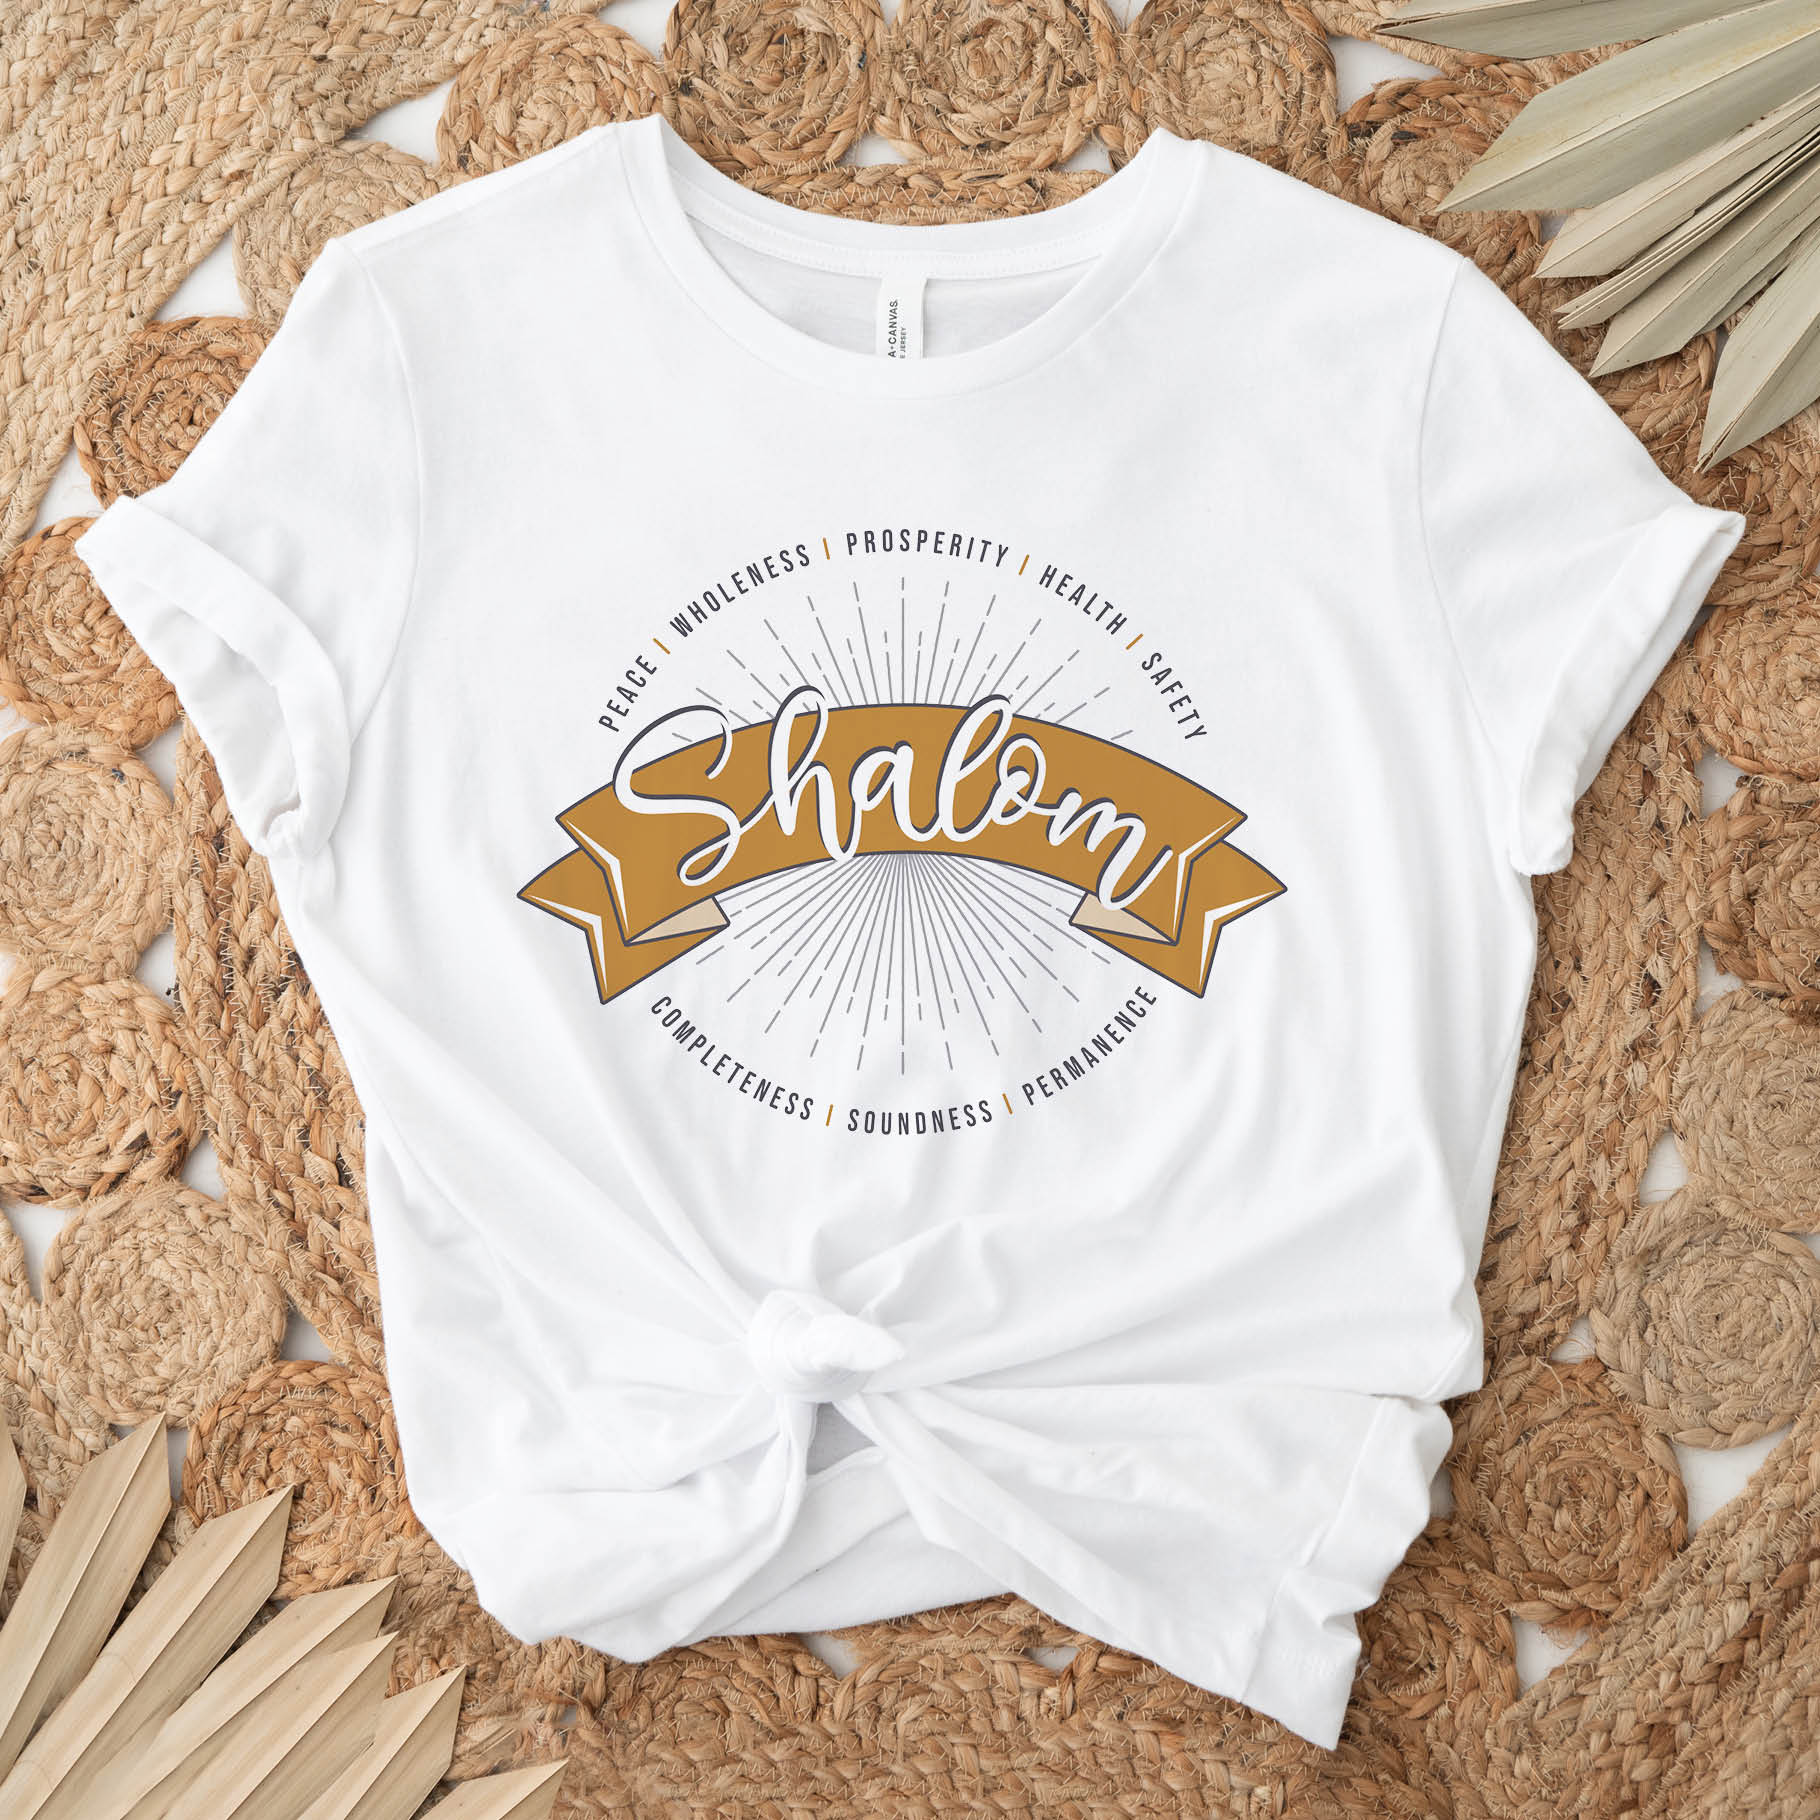 Soft white faith-based Christian women's unisex t-shirt with a gold banner and sunburst design that says the Hebrew meaning of the word "SHALOM" -  Peace, Completeness, Prosperity, Health, Safety, Wholeness, Soundness, and Permanence definition, makes a great mother's day gift for mom!